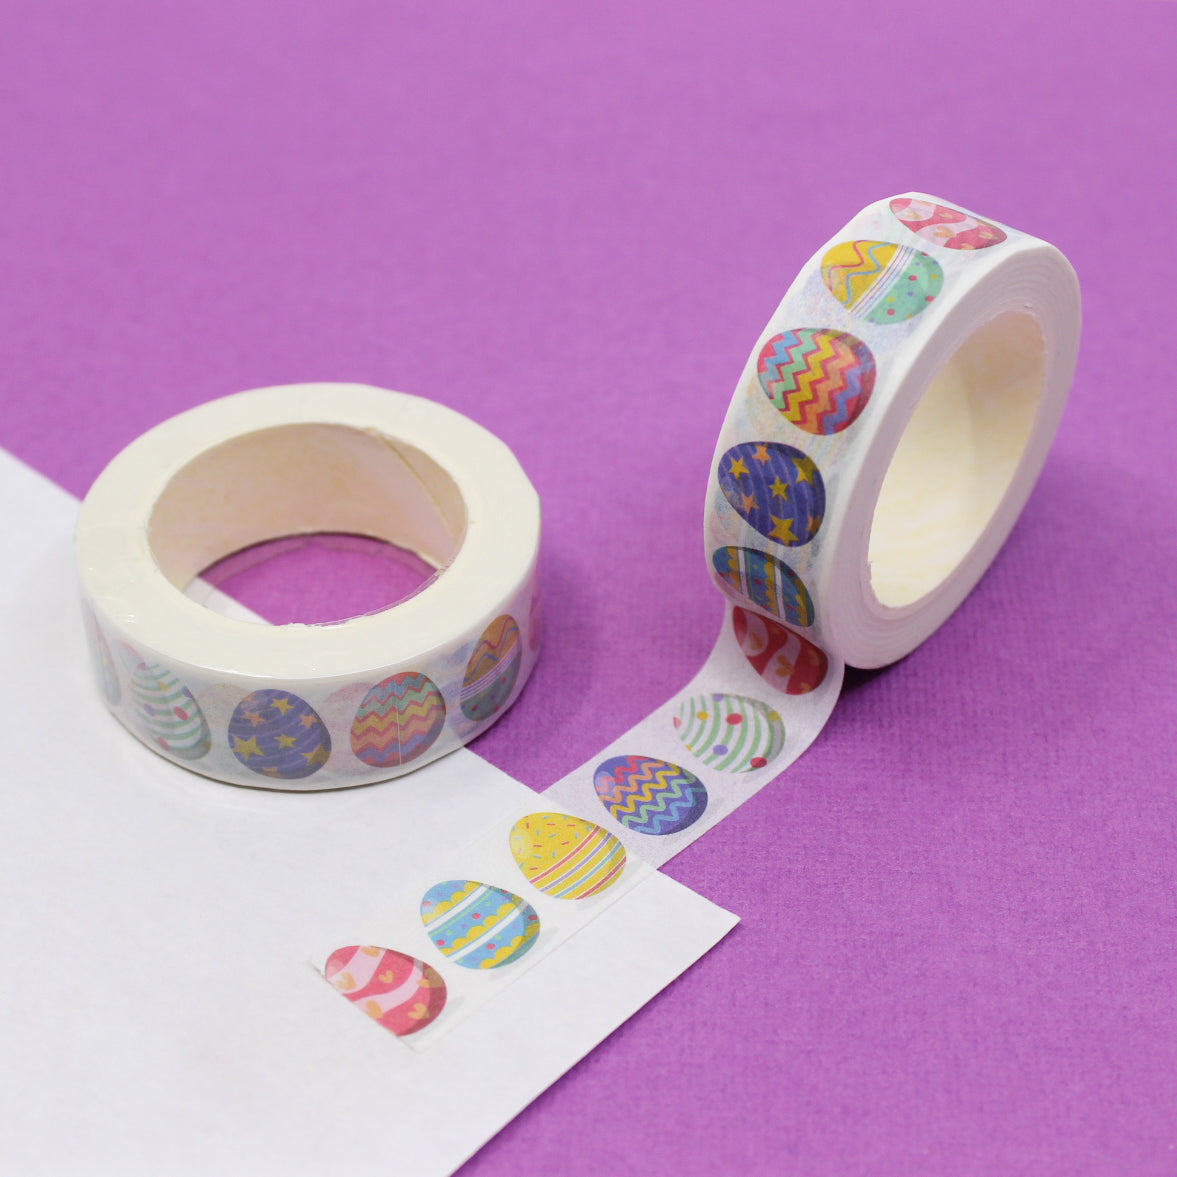  Patterned Easter Egg Washi Tape: Decorate your Easter projects with this charming washi tape featuring a variety of colorful and patterned Easter eggs, perfect for adding a festive touch to cards, gifts, and decorations. This tape is sold at BBB Supplies Craft Shop.